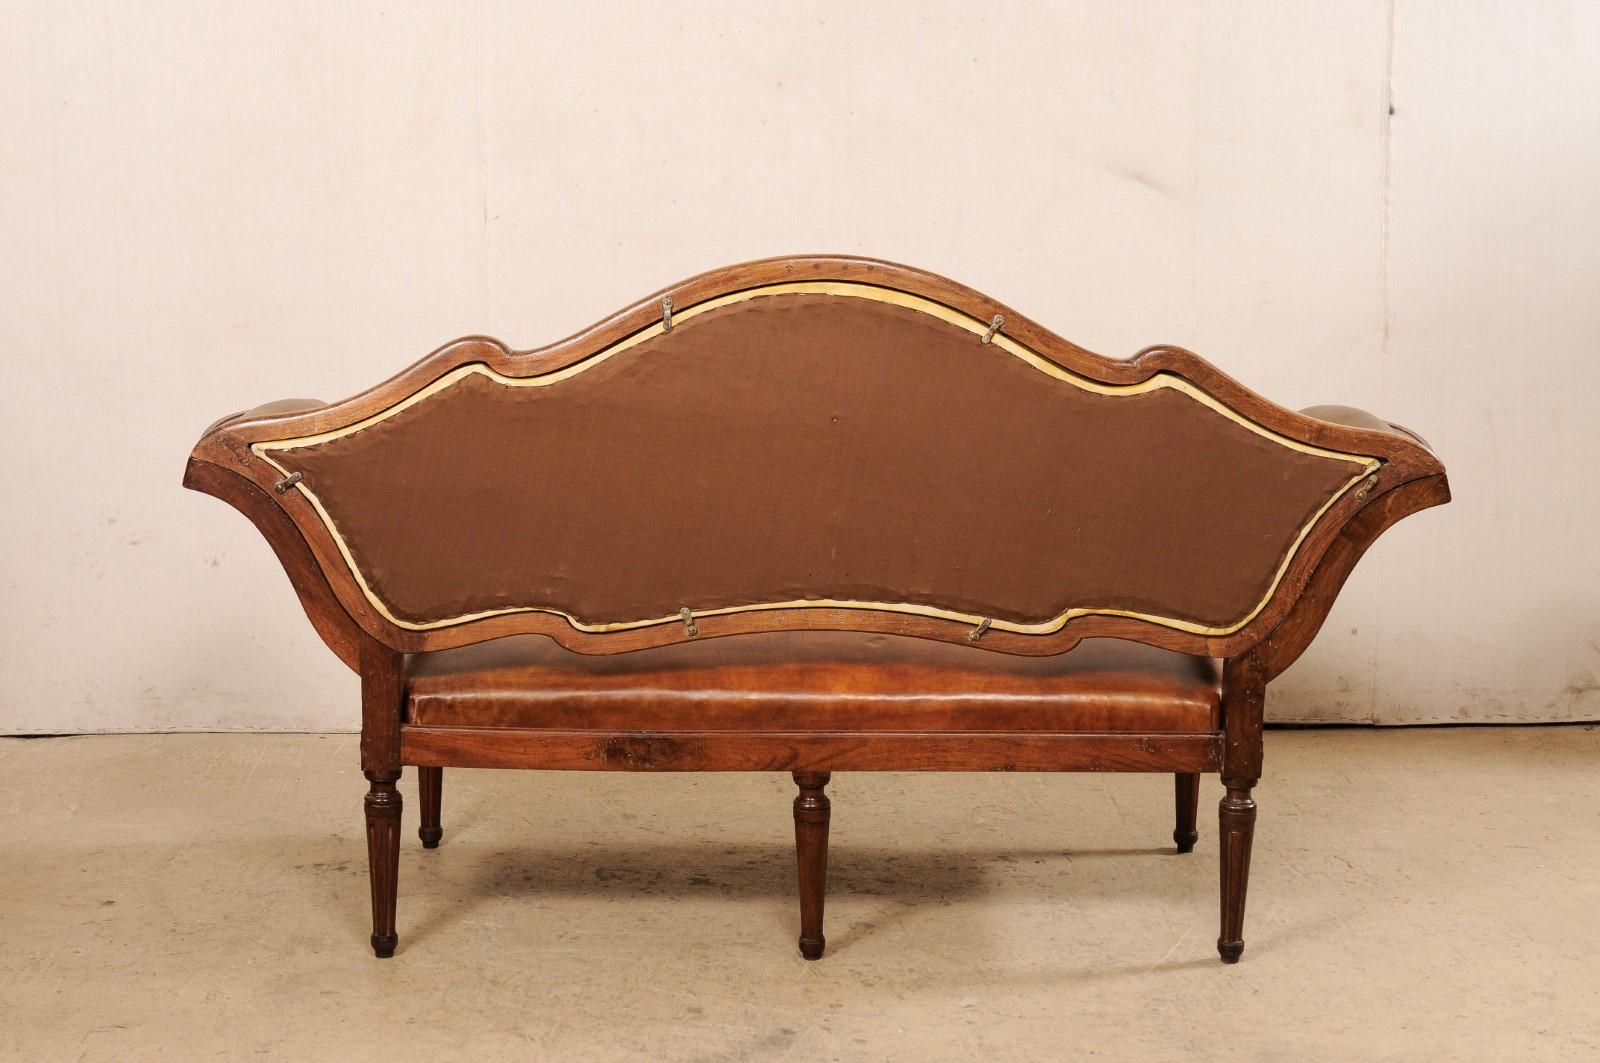 Italian Venetian Leather Upholstered & Carved Wood Settee Sofa, 19th Century For Sale 5